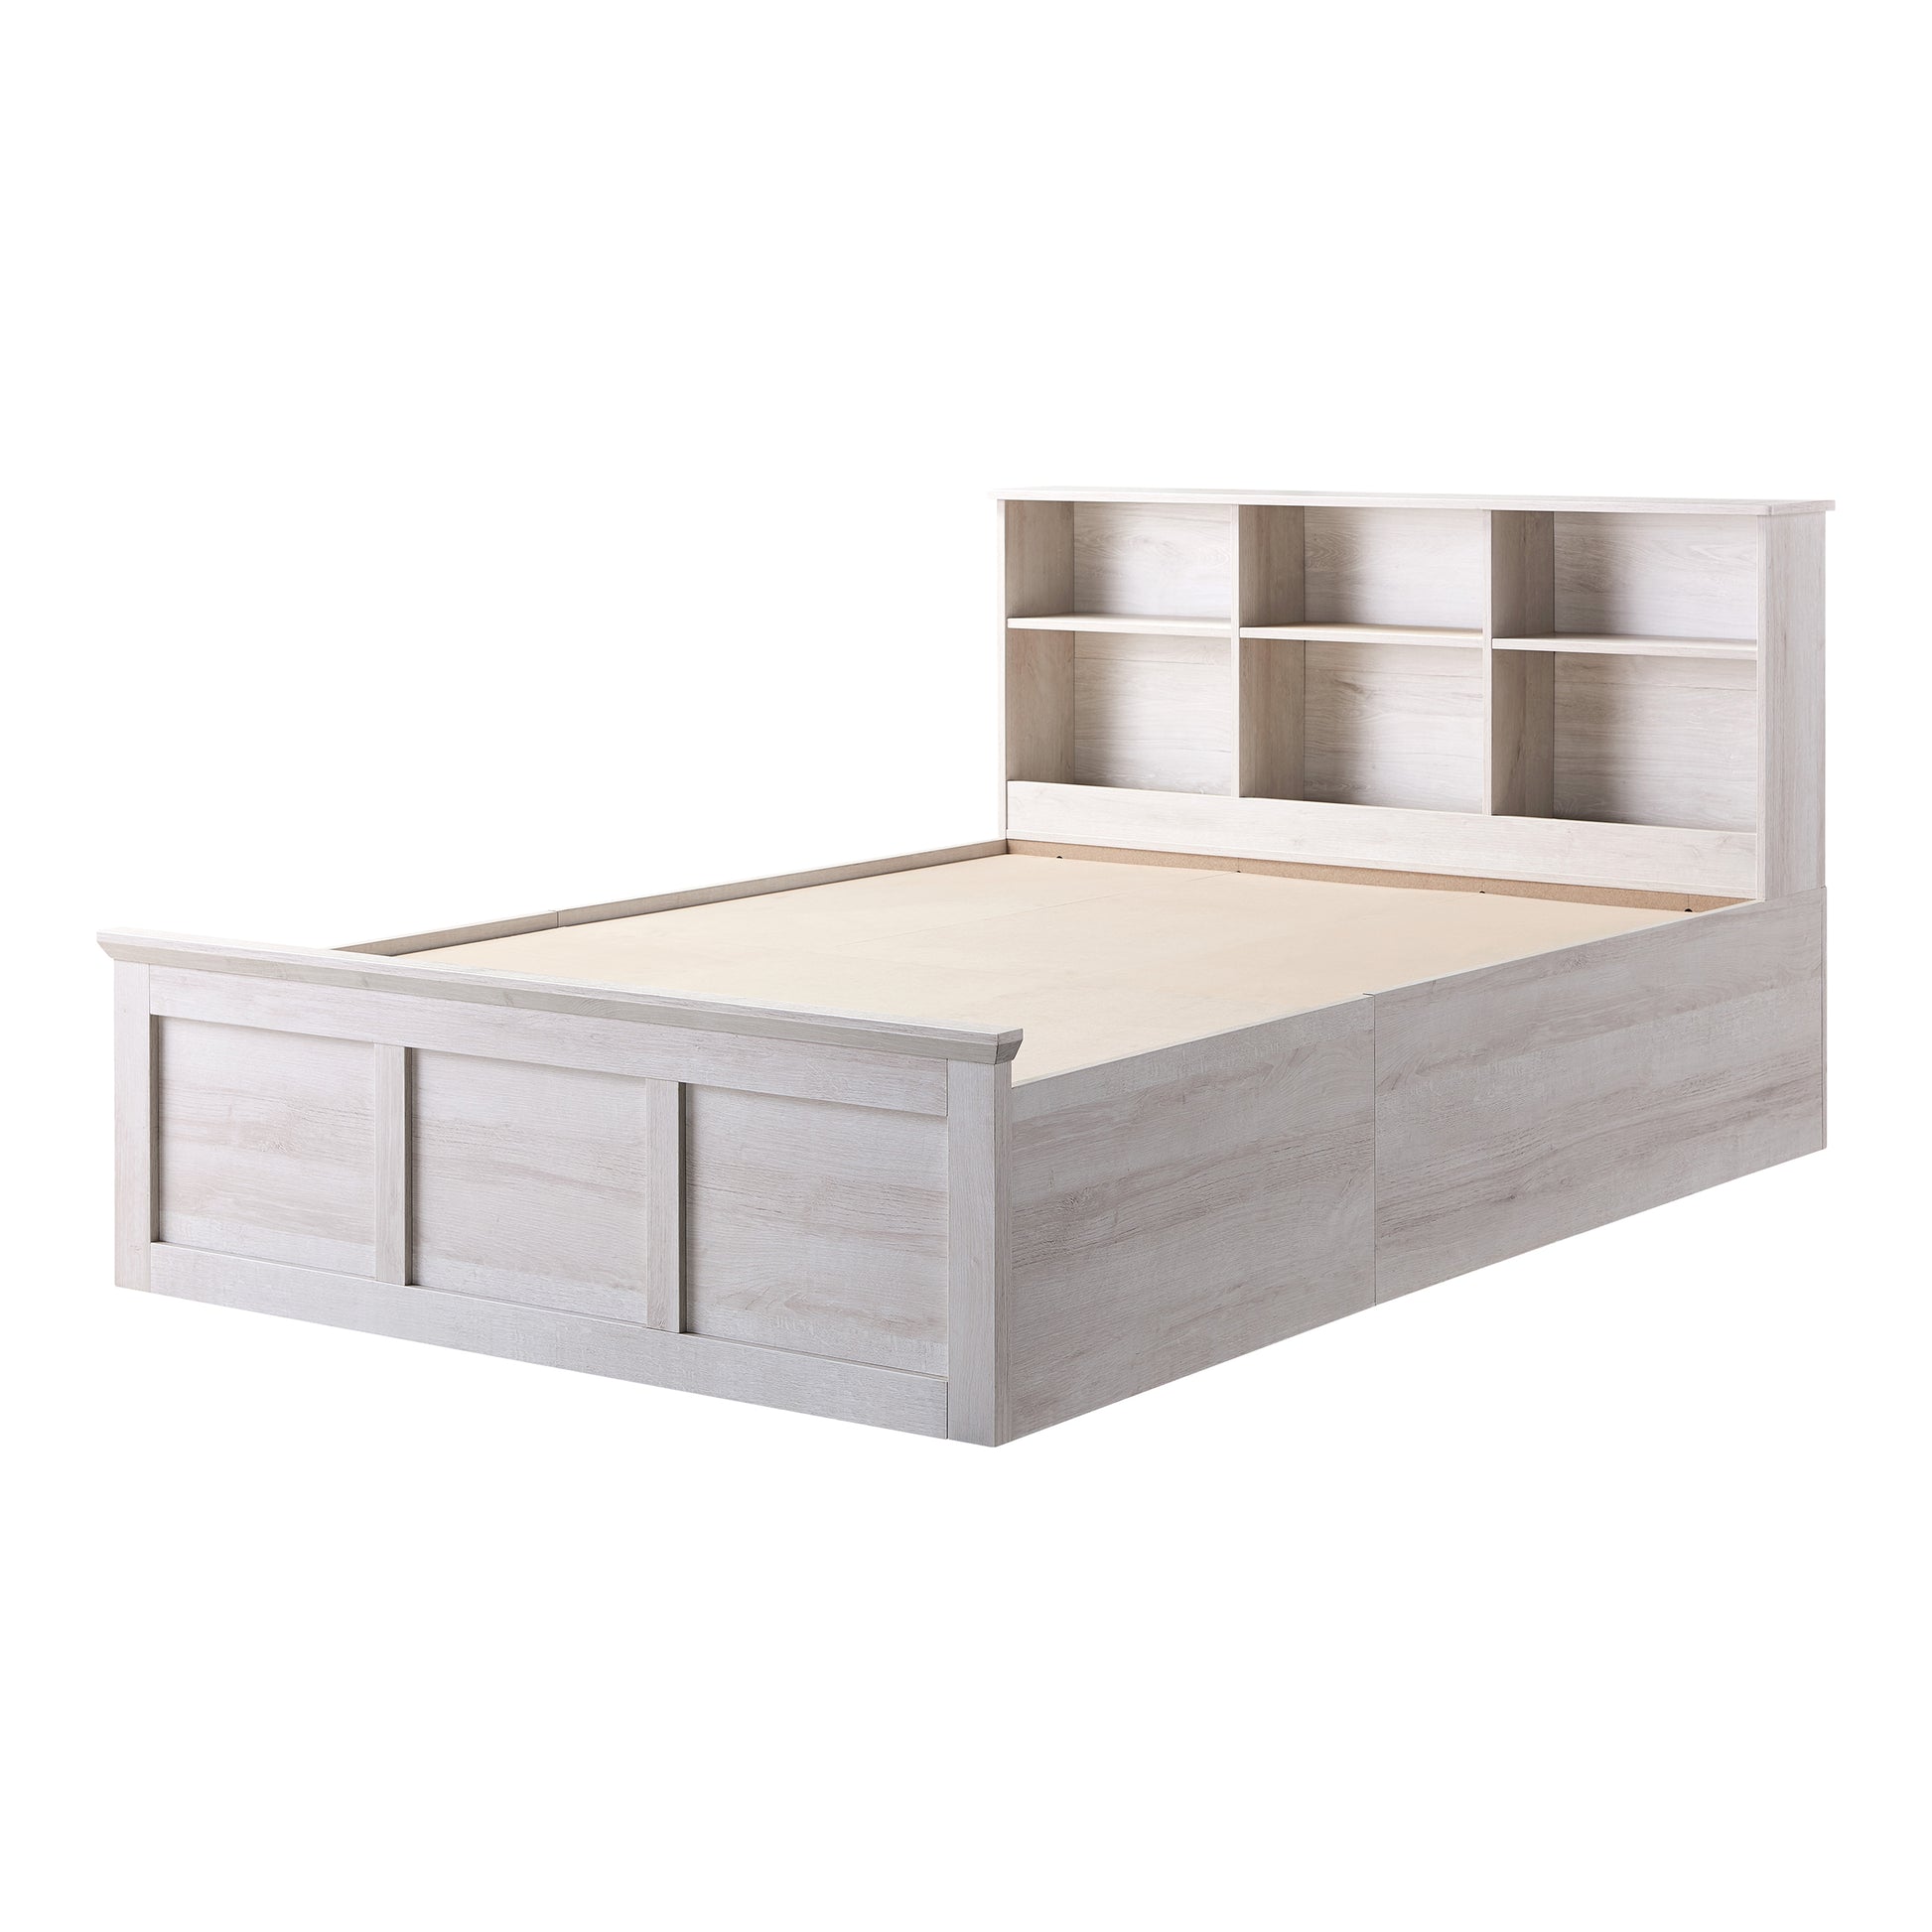 Left angled transitional white oak two-drawer four-shelf storage bed shown with optional bookcase headboard on a white background